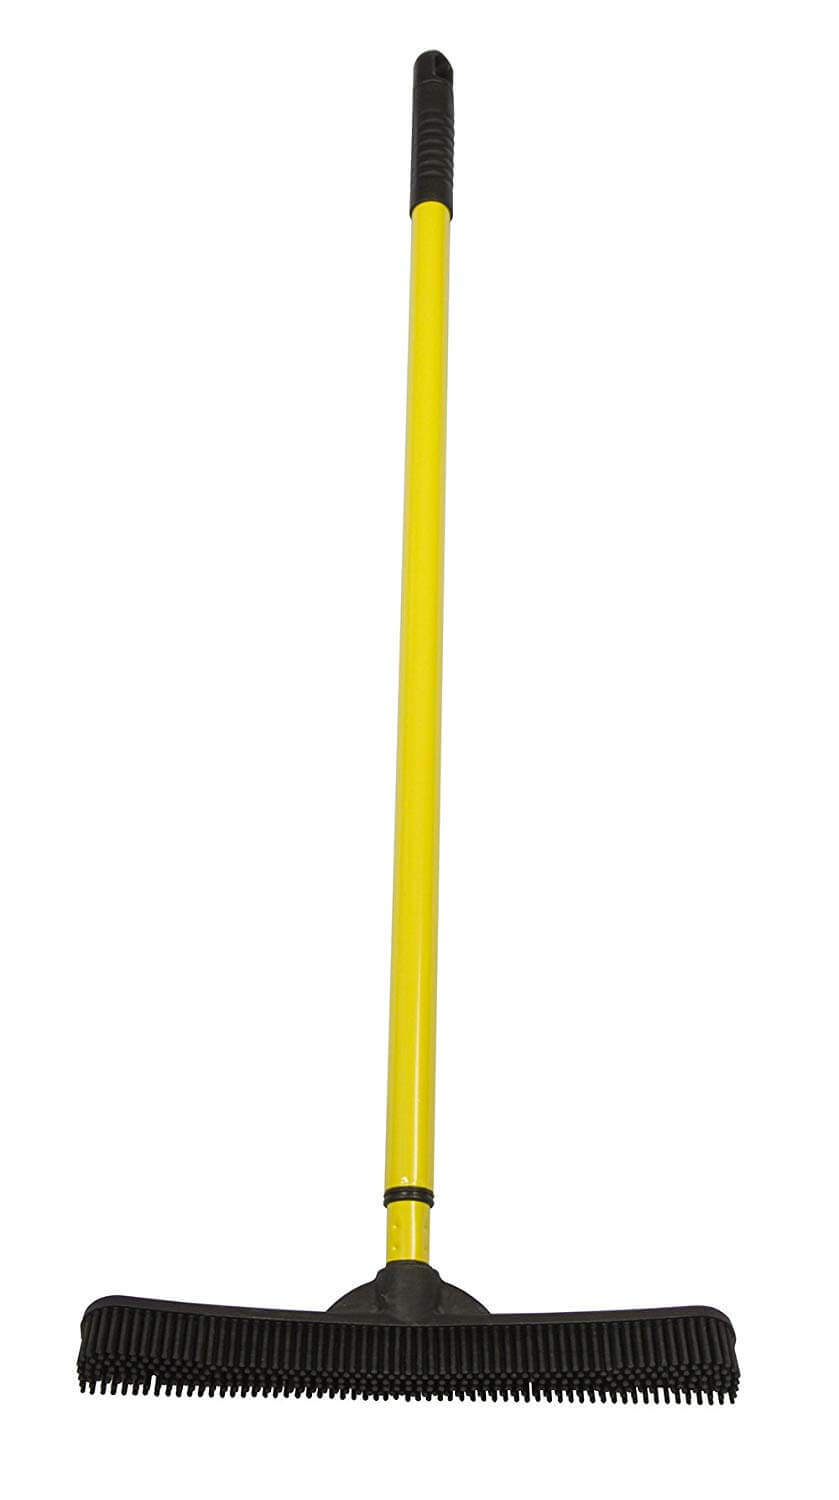 Evriholder FURemover Broom with Squeegee made from Natural Rubber